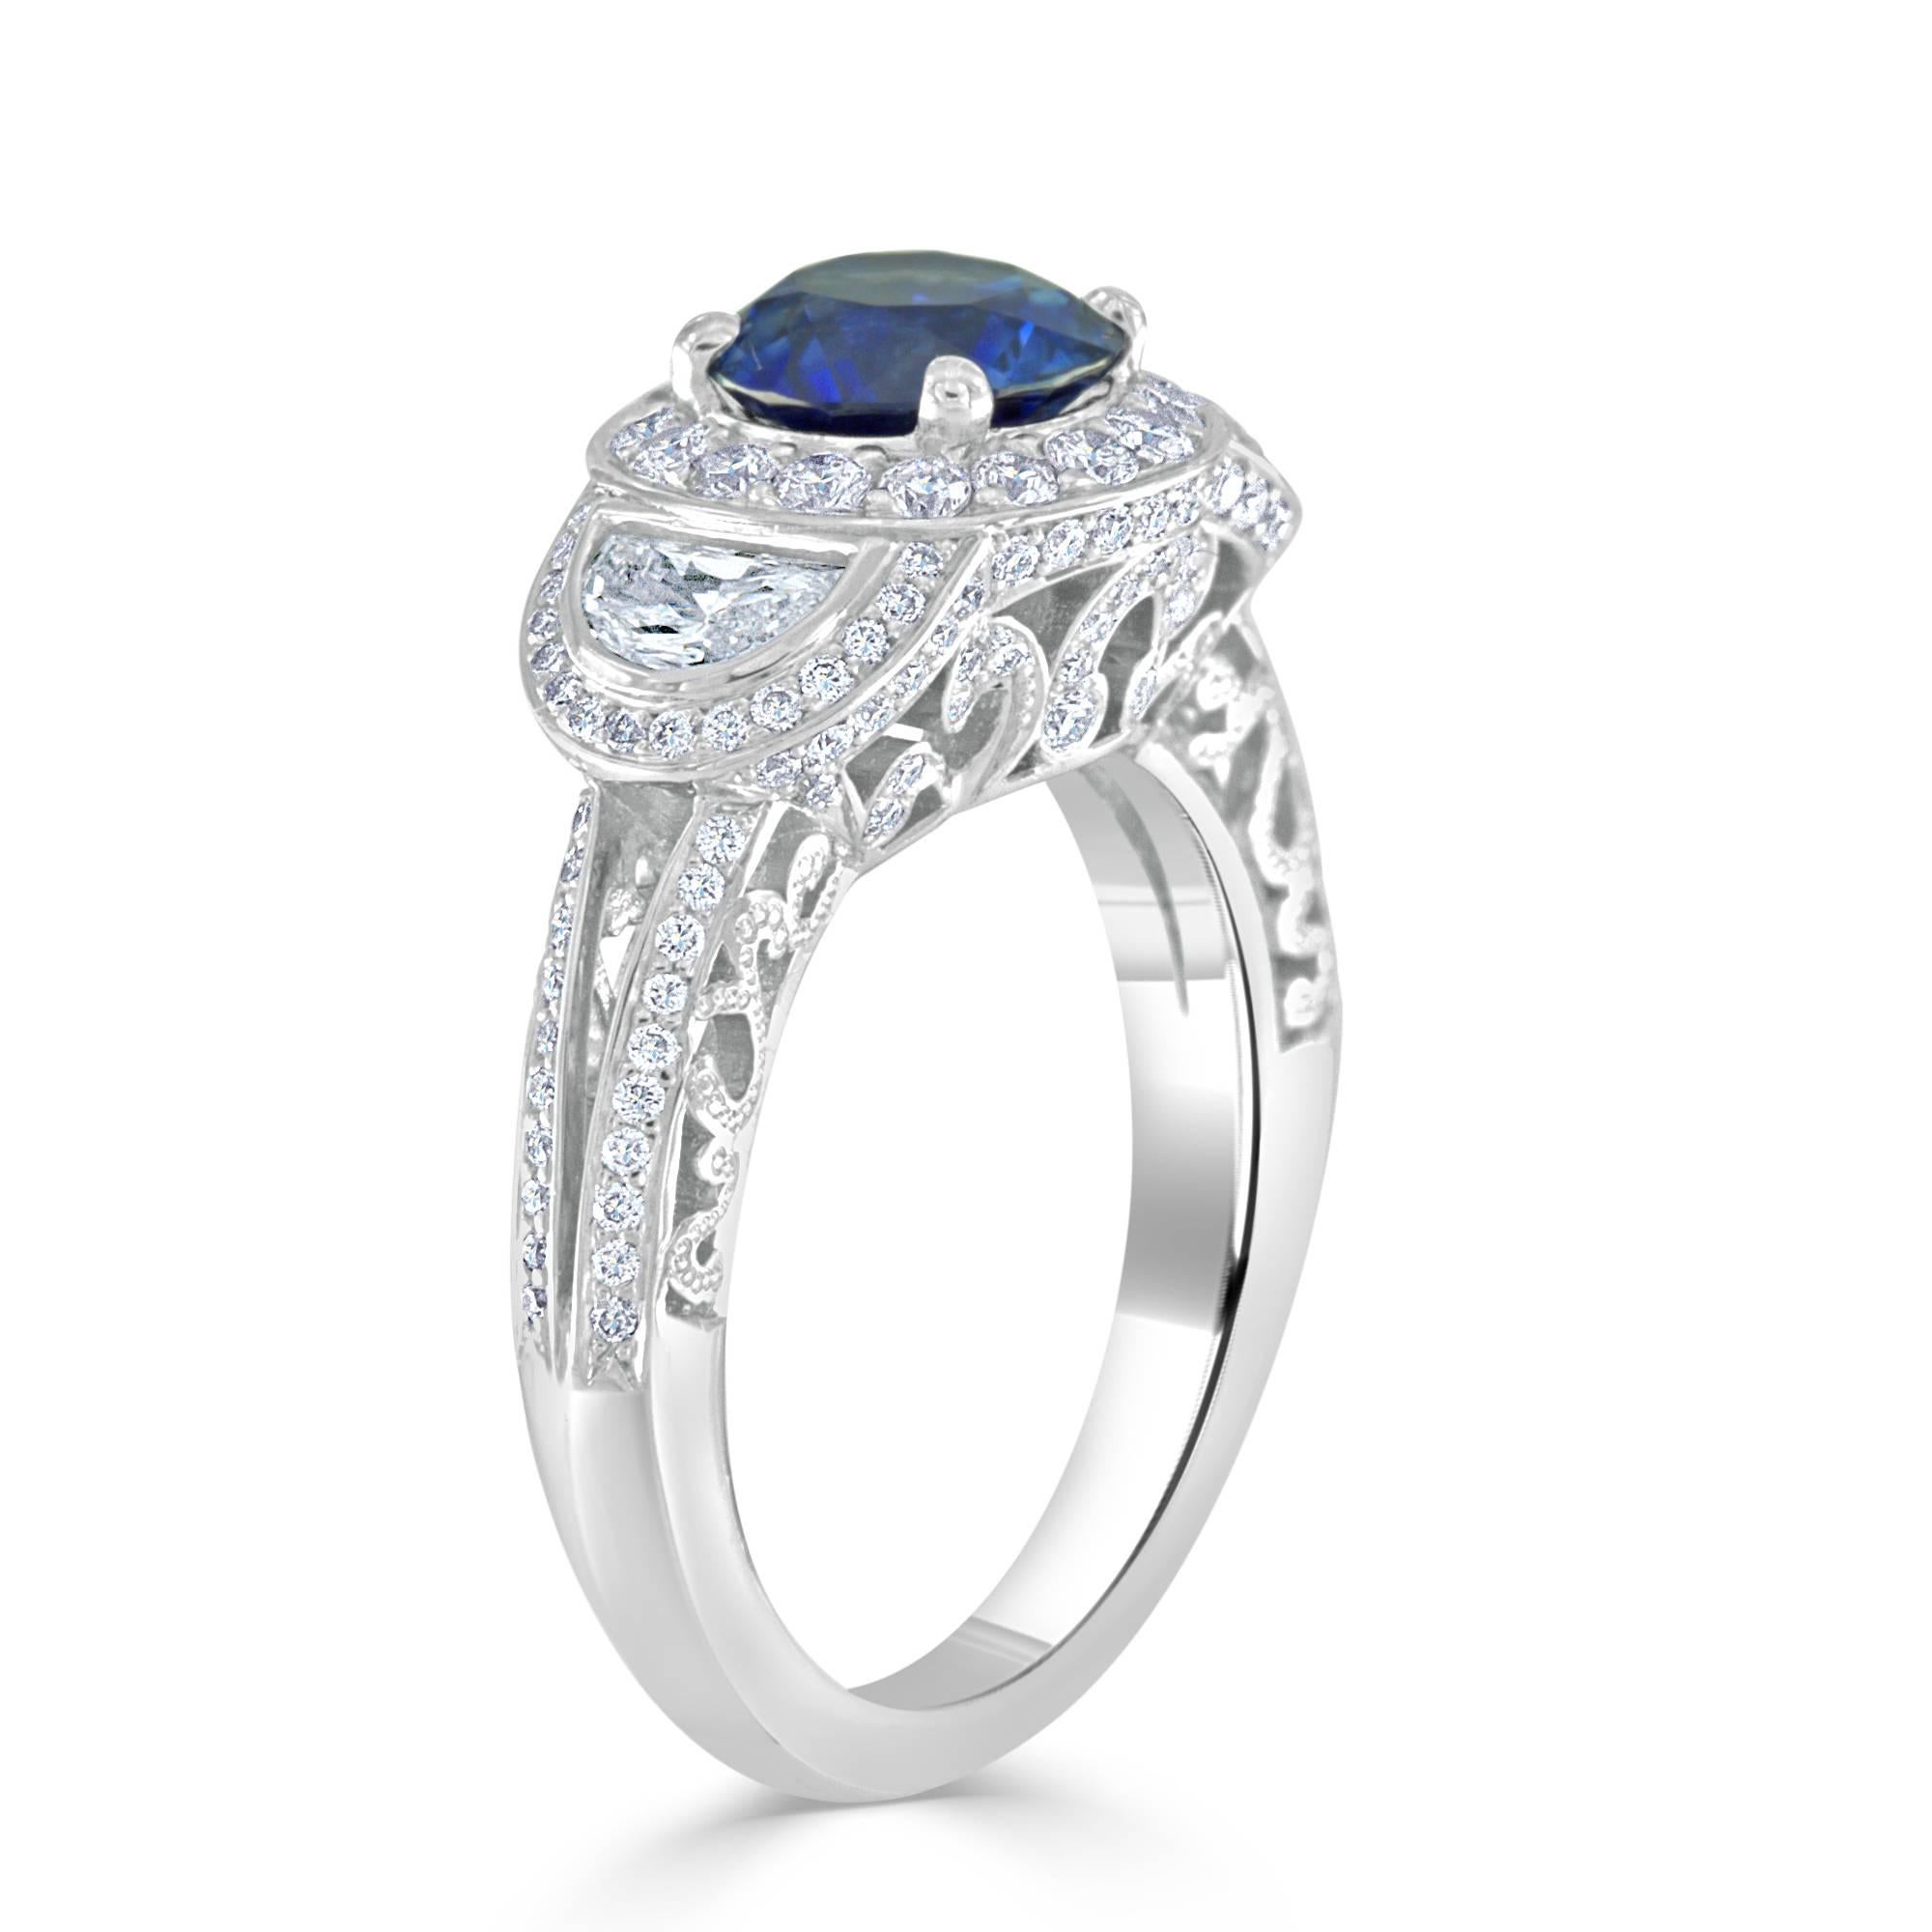 This exquisite sapphire and diamond platinum ring features a 1.74 carat round sapphire having excellent color and cut. Set with 2- half moon cut diamonds weighing 0.51 carat total, having VS clarity and G color. Also set with 148- round brilliant